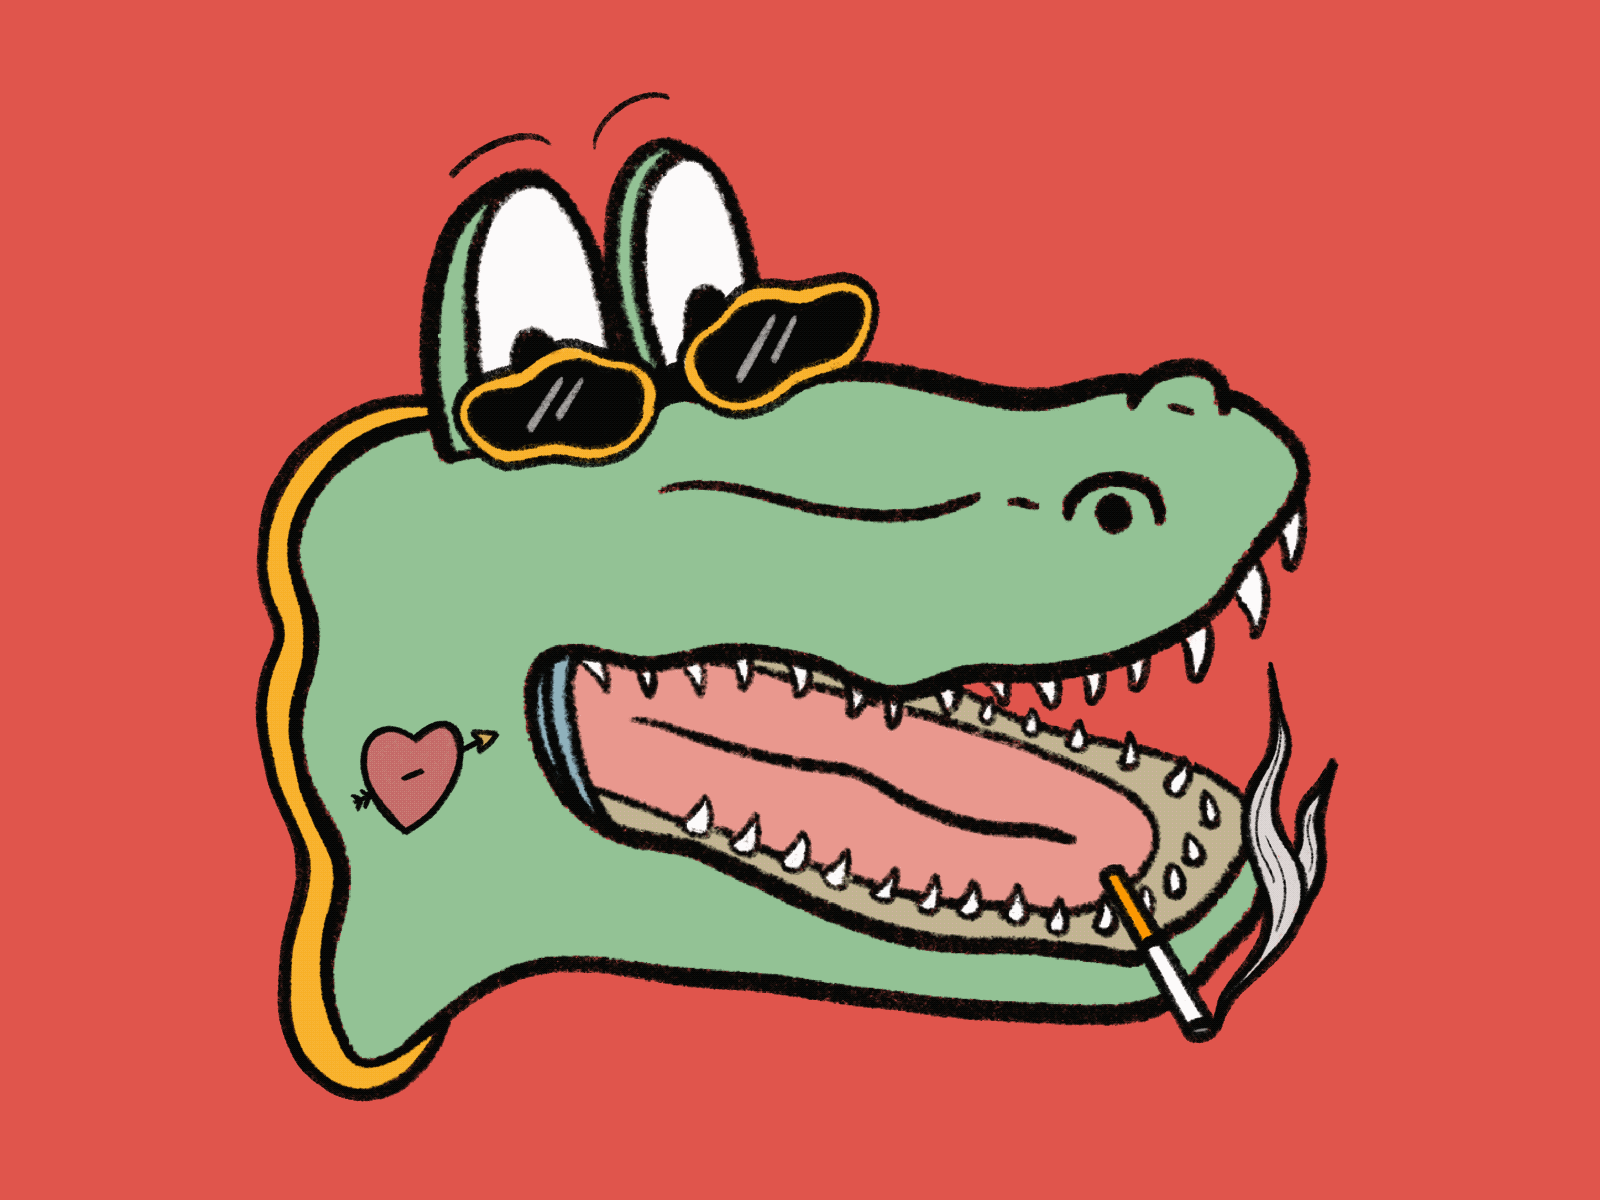 smooth alligator by Les Patin on Dribbble